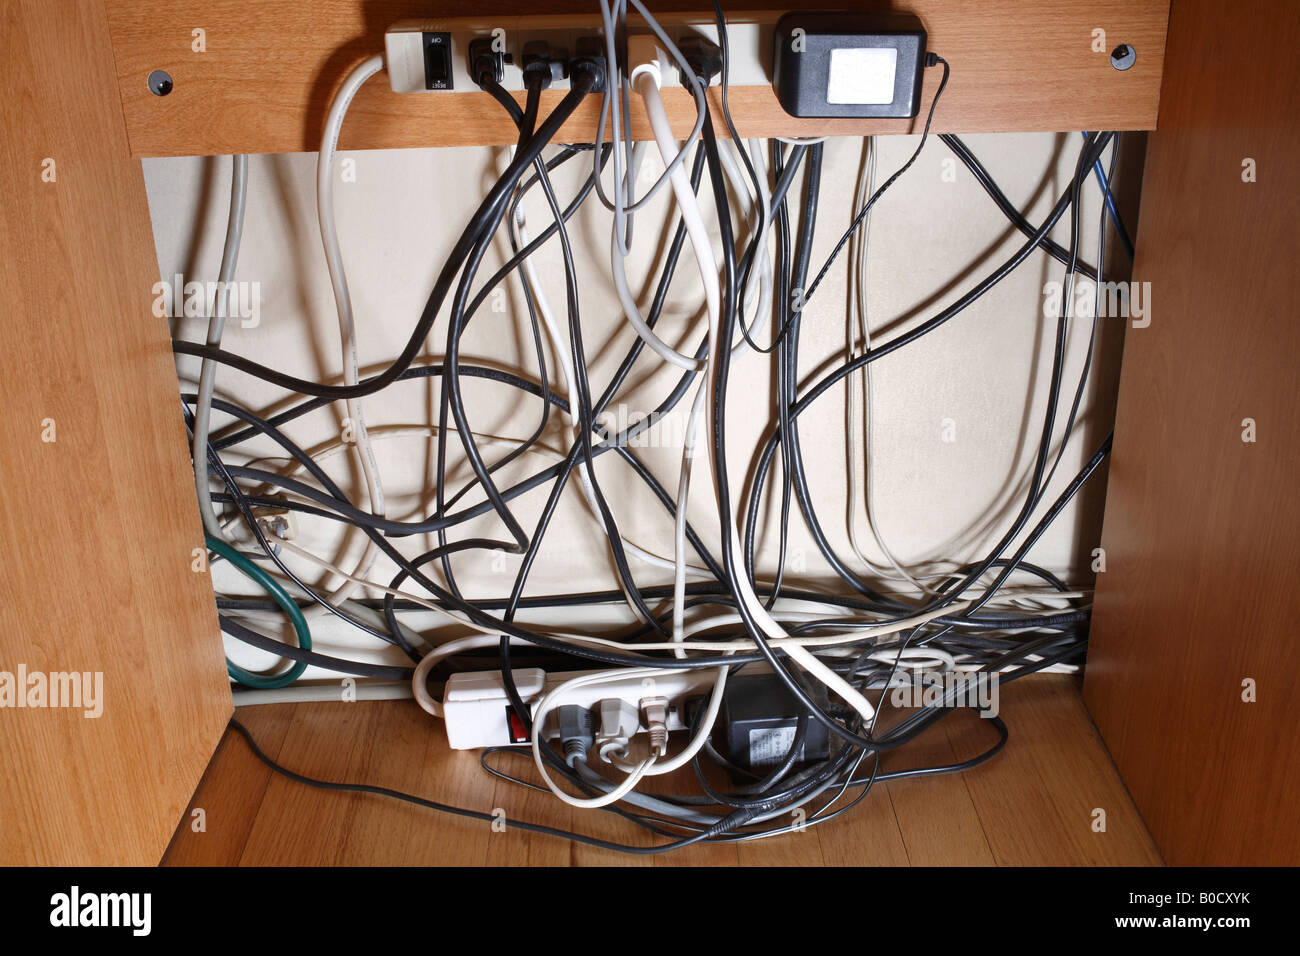 Power strips power cords computer cables under desk Stock Photo